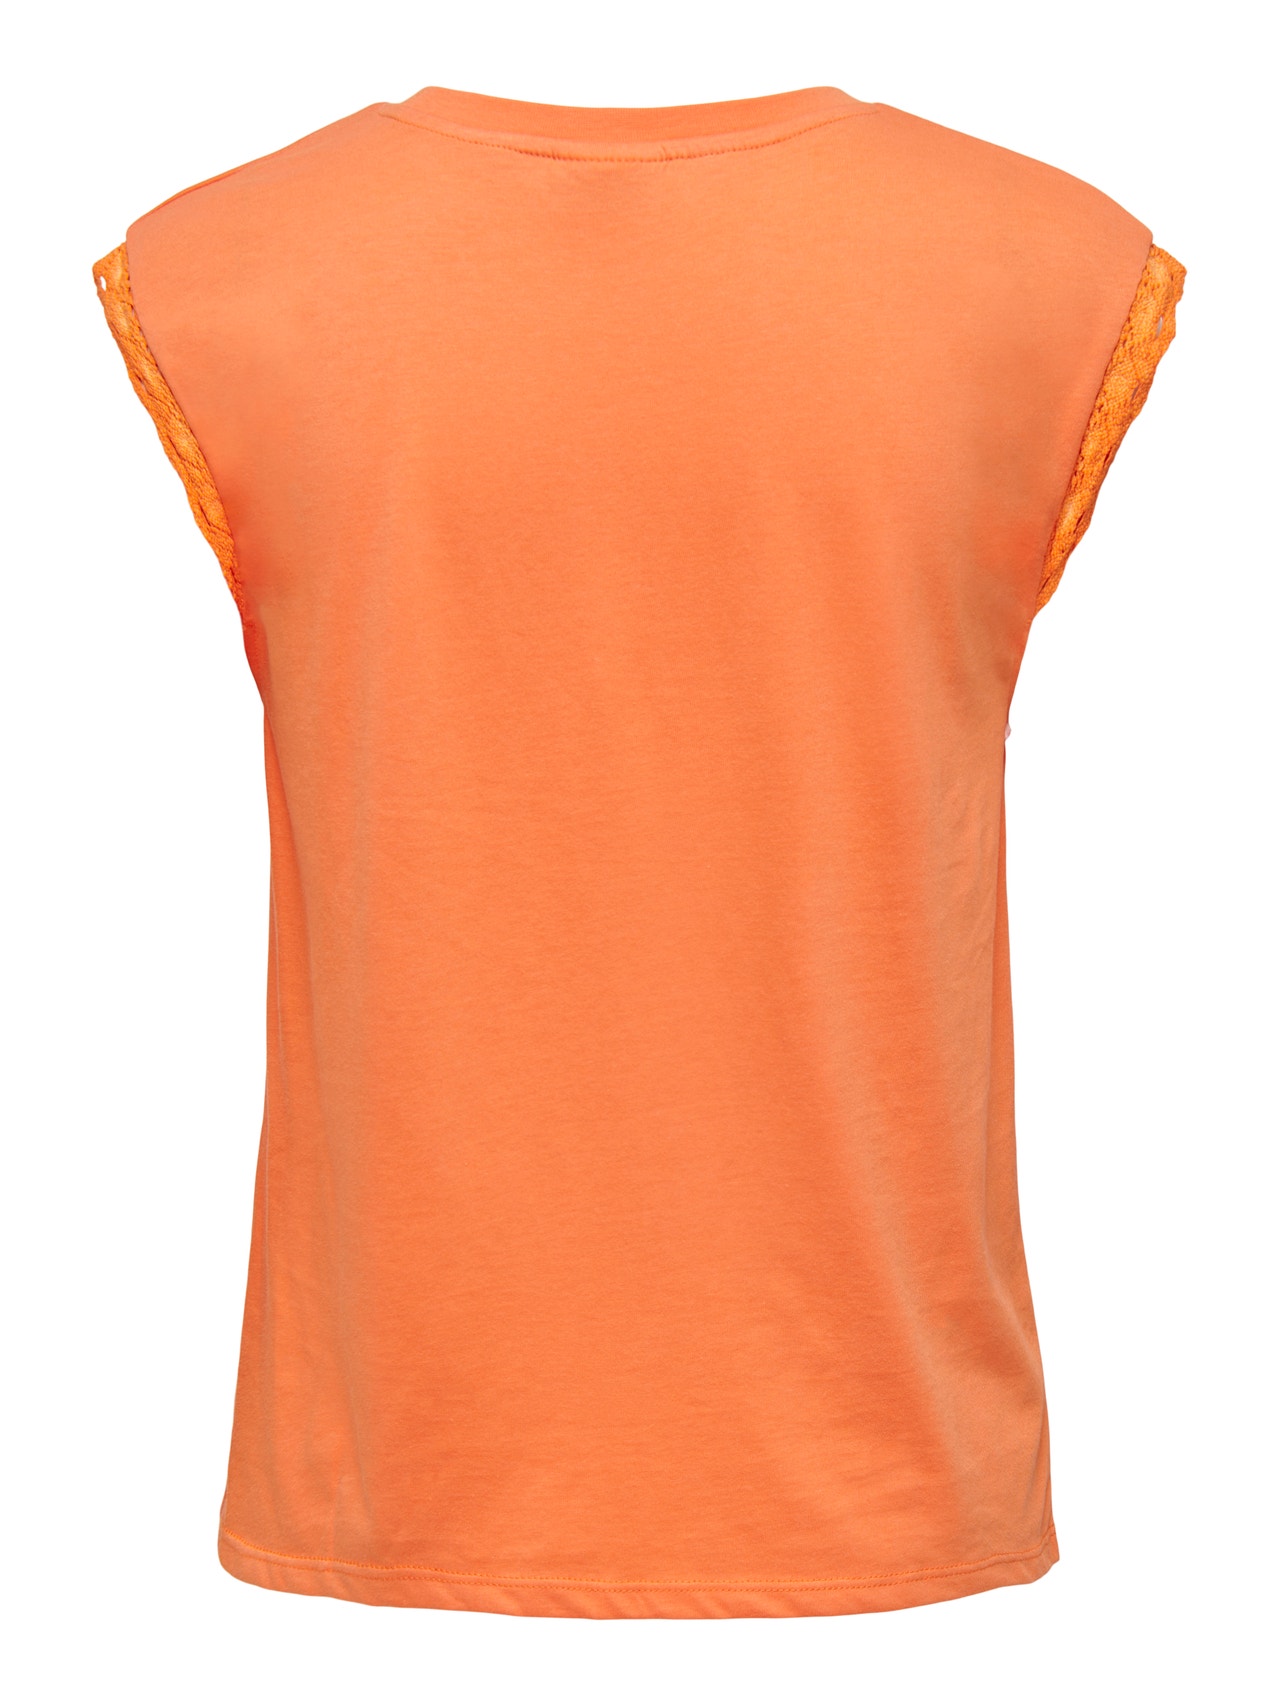 ONLY Regular Fit Round Neck Top -Autumn Sunset - 15295600